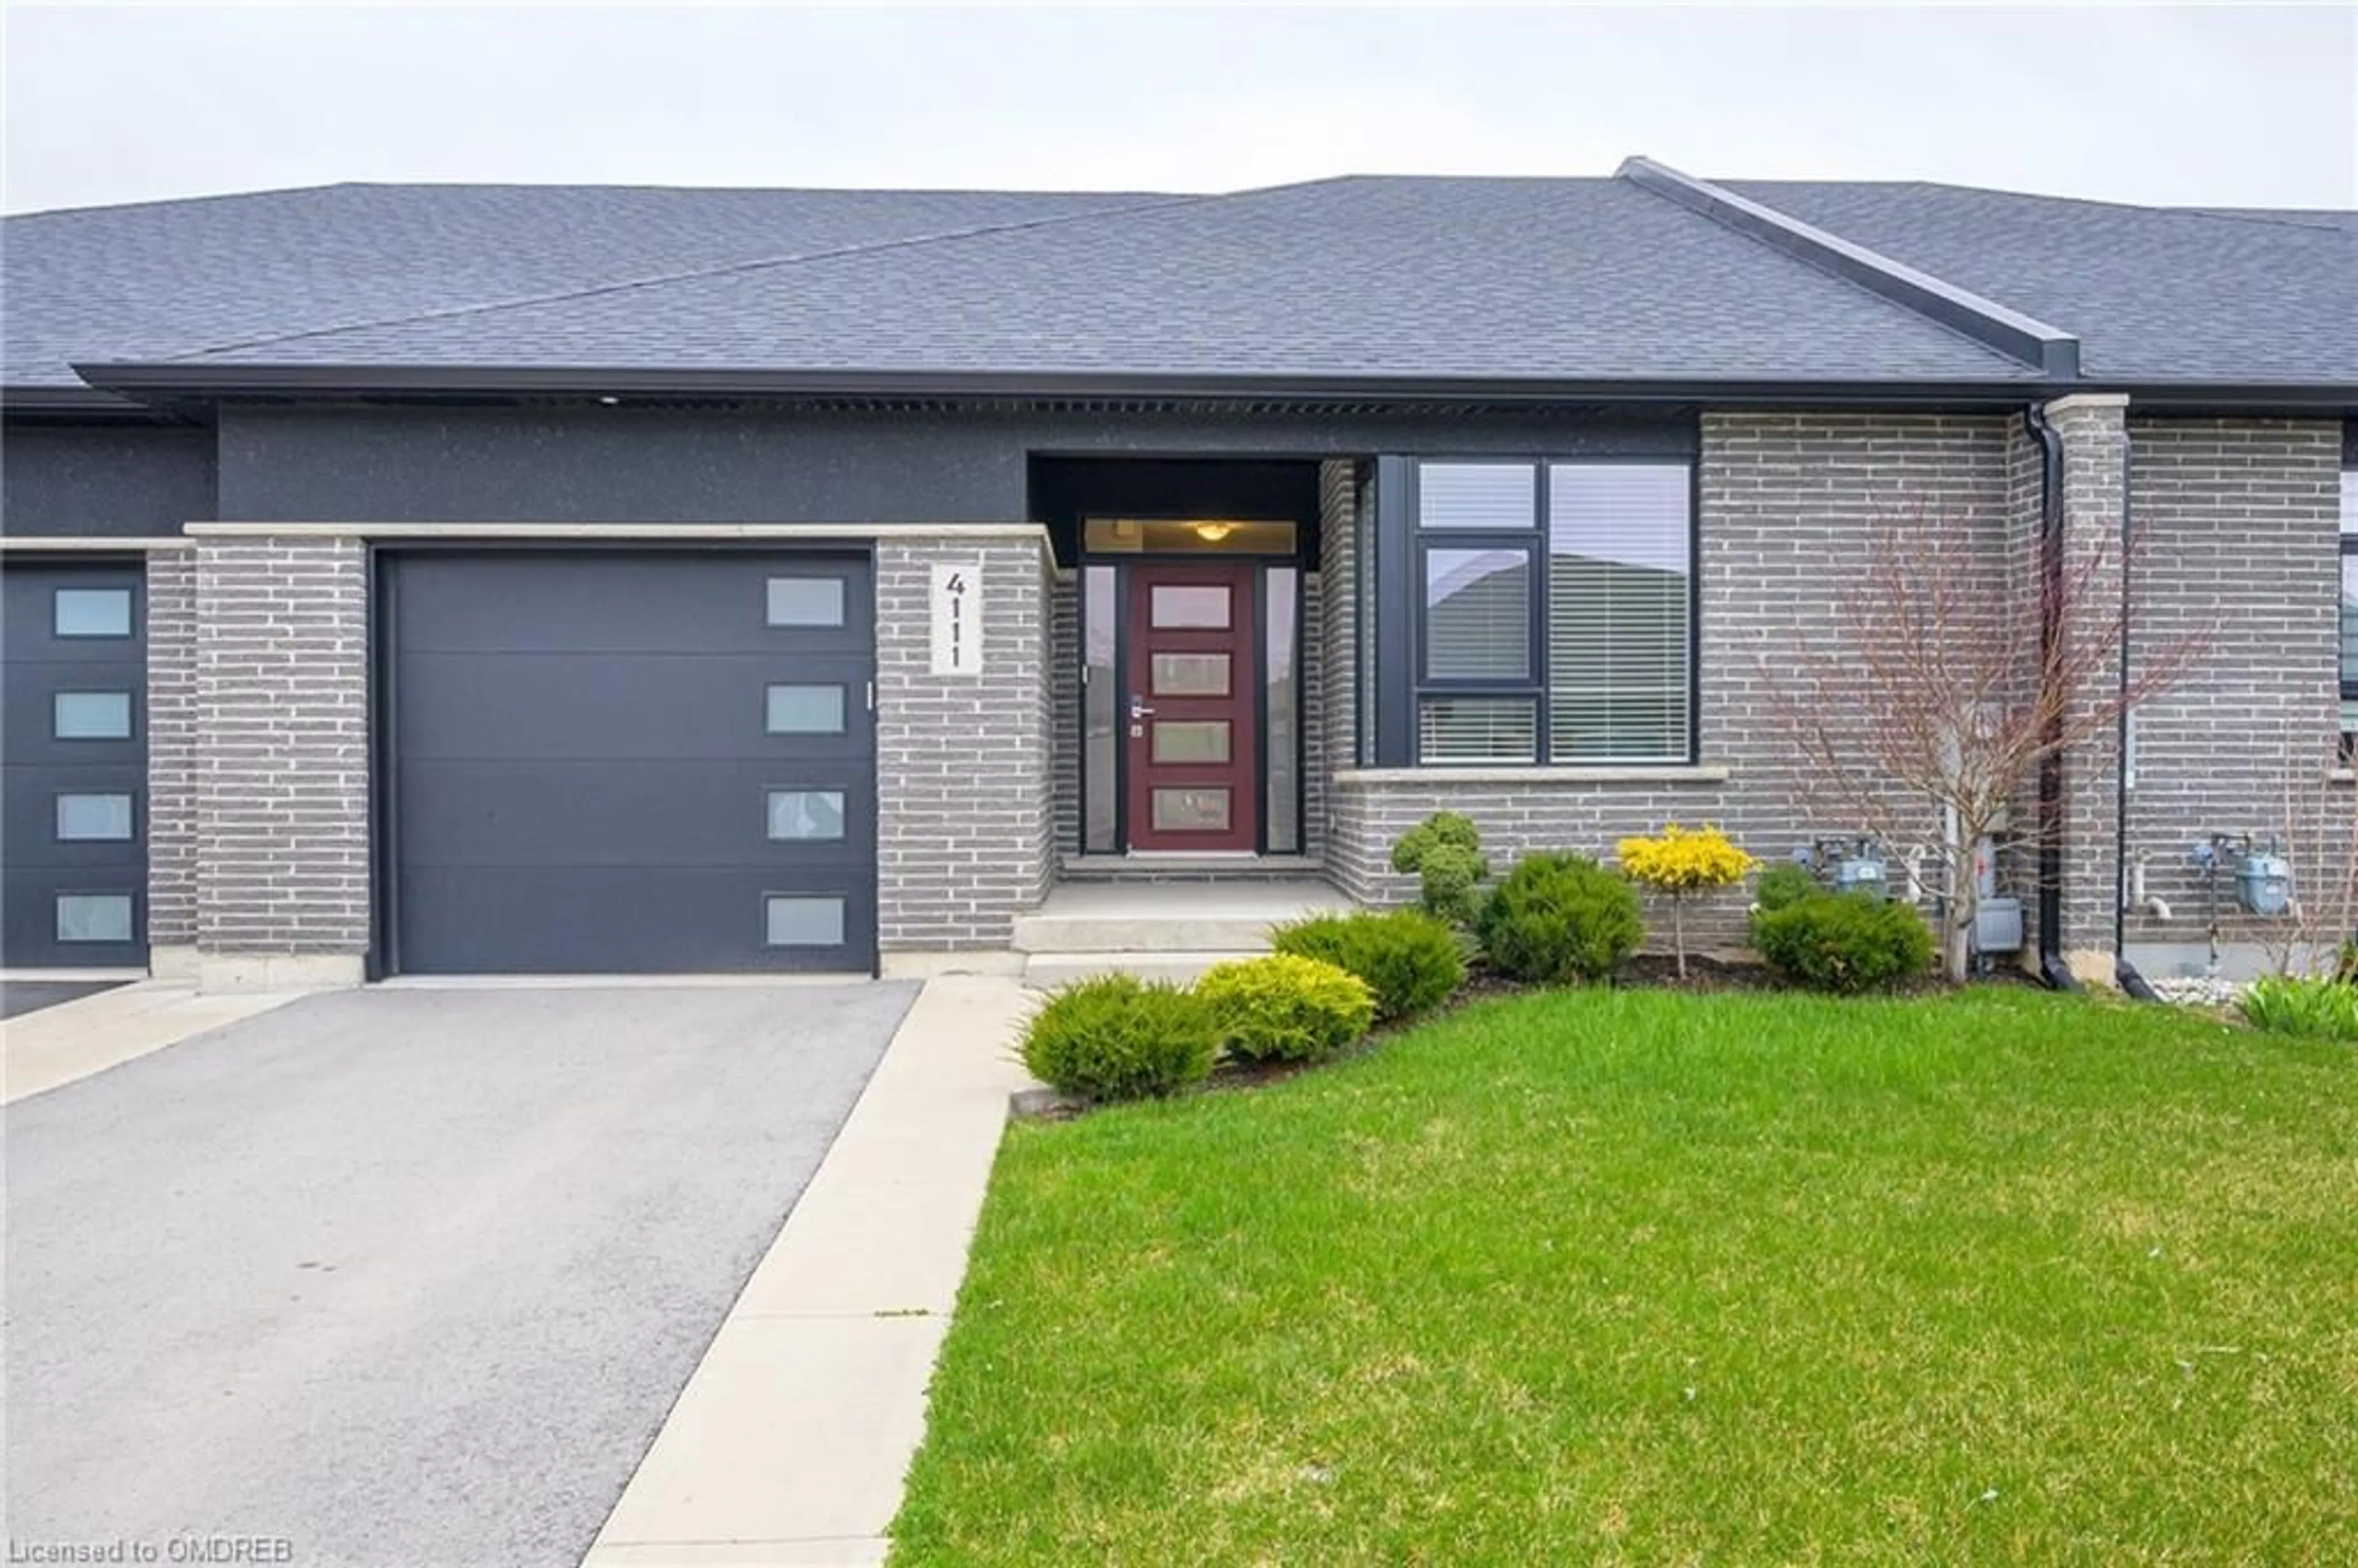 Home with brick exterior material for 4111 Village Creek Dr, Fort Erie Ontario L0S 1S0